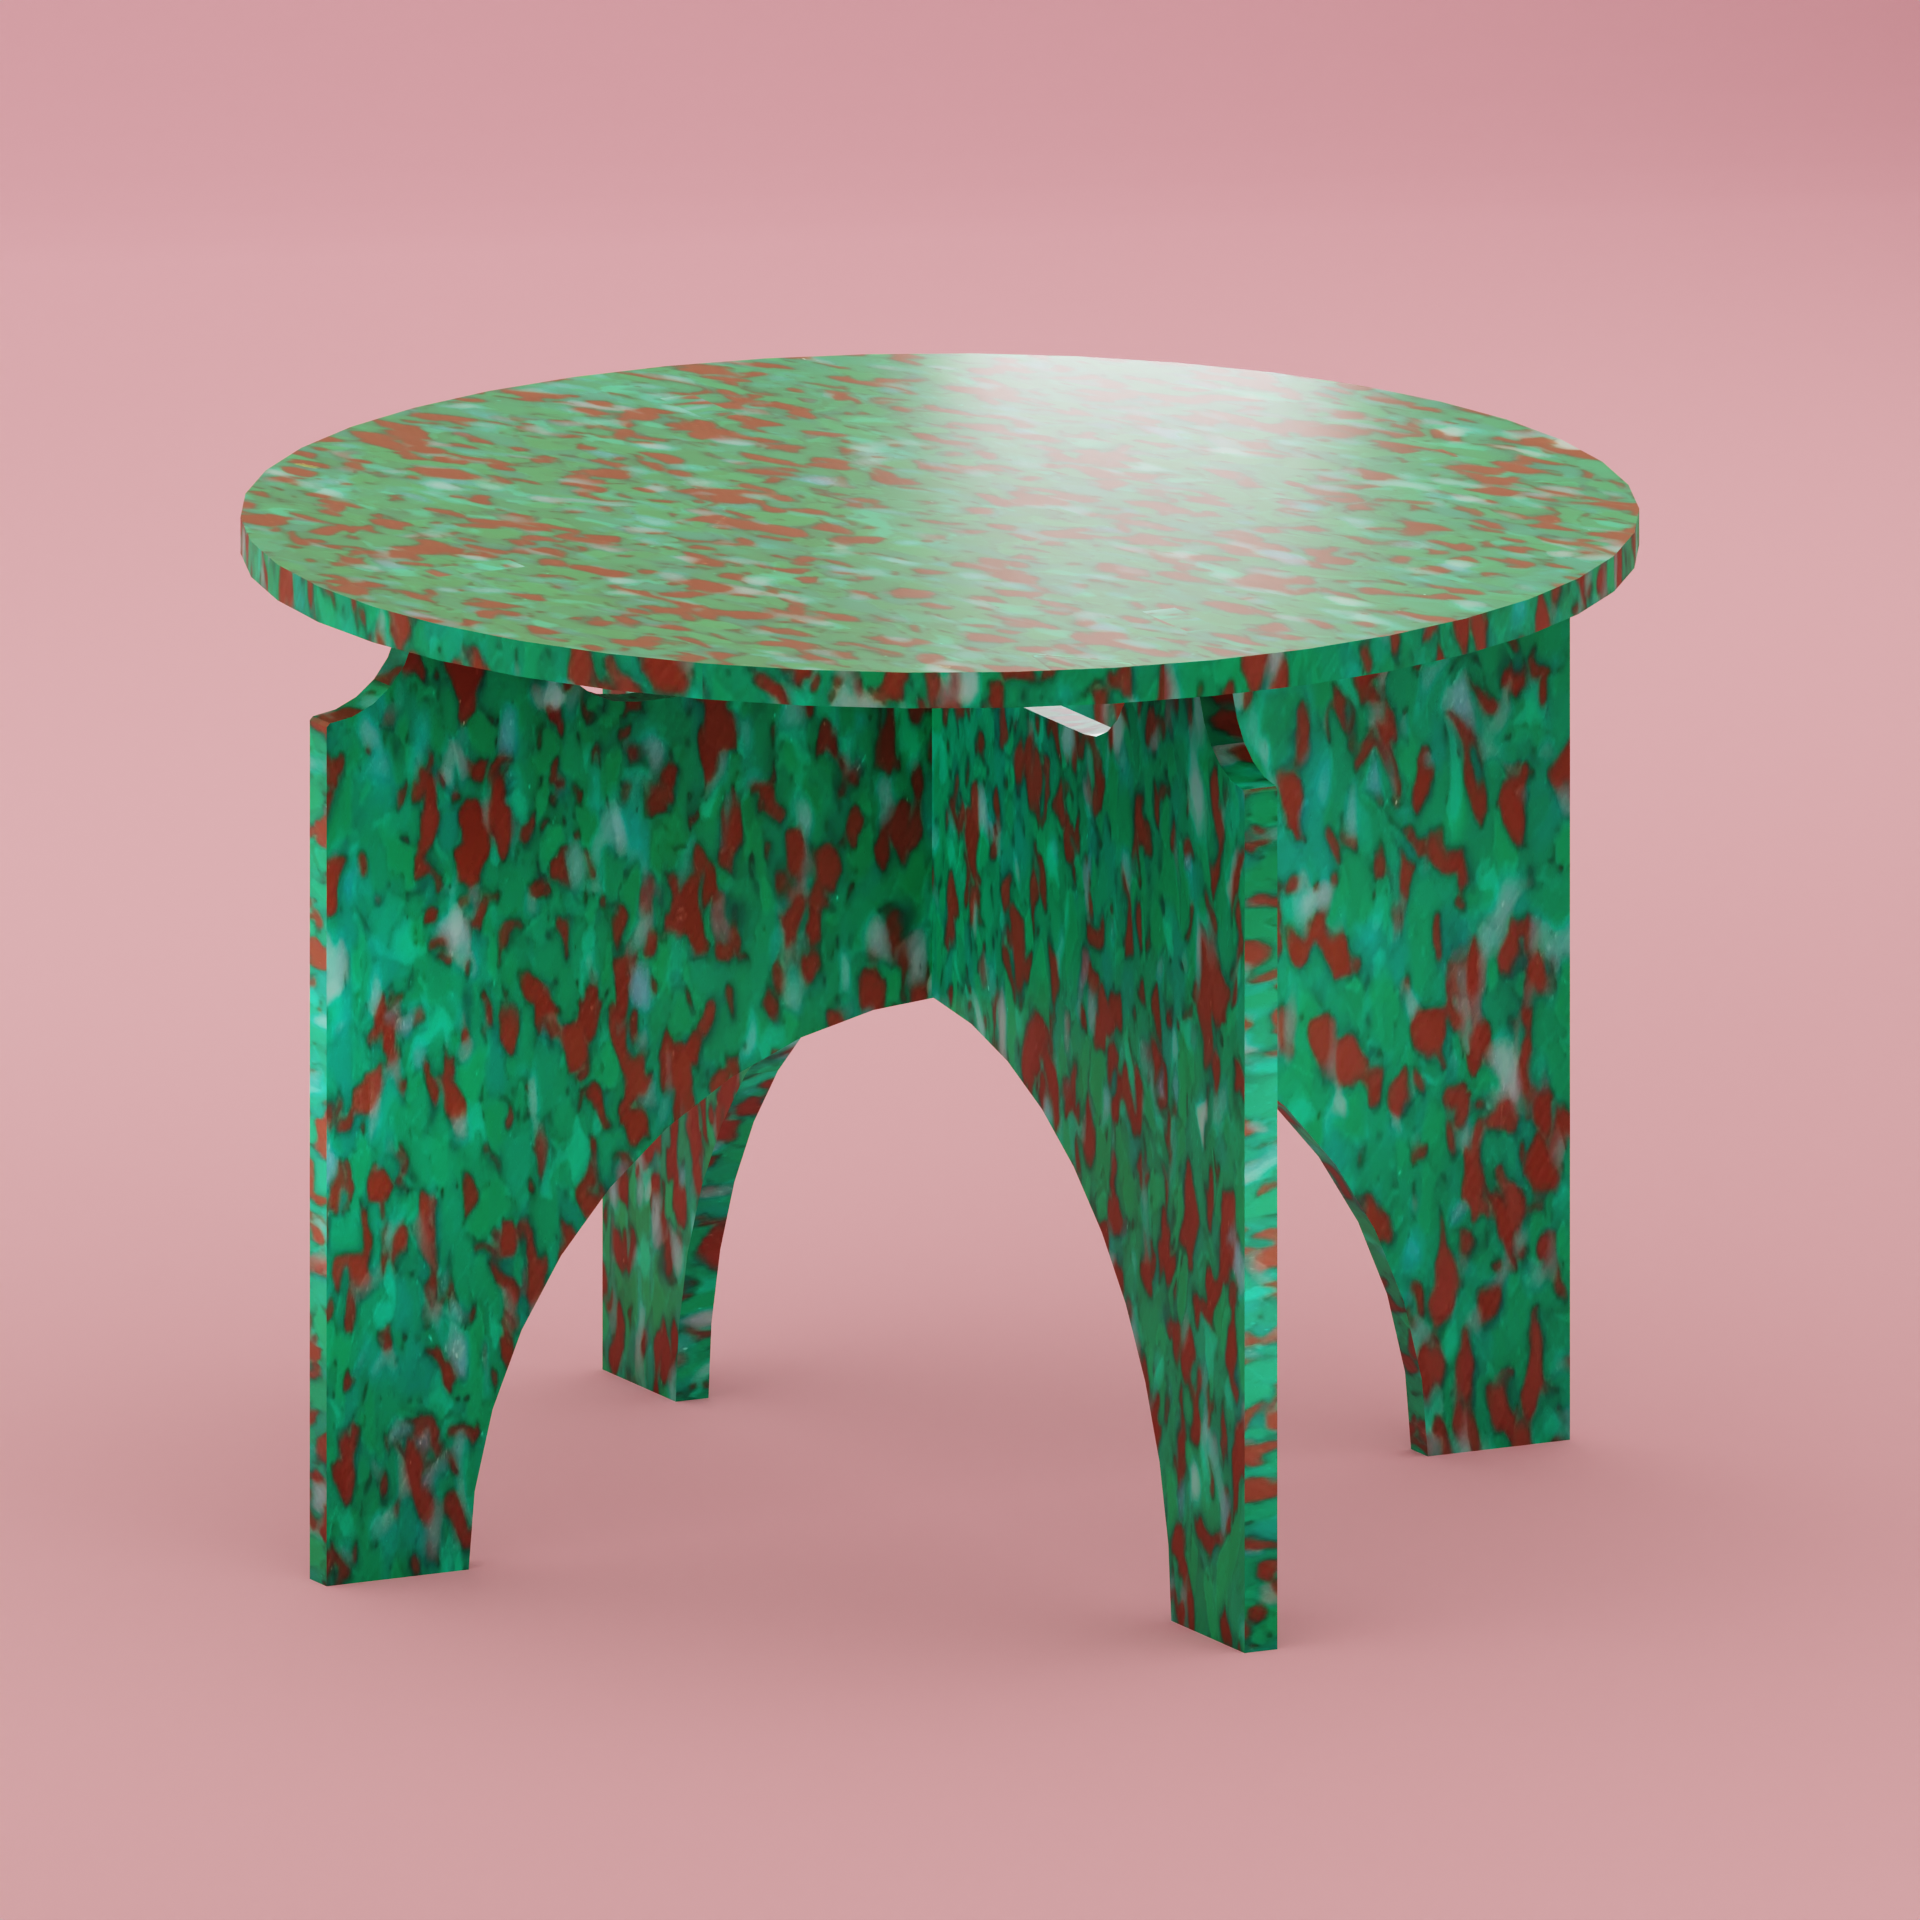 GREEN ROUND TOP TABLE BY THE MINIMONO PROJECT - BRAND FOR ECO FRIENDLY - PLAYFUL - MULTI FUNCTIONAL - SUSTAINABLE - HIGH QUALITY - DESIGN FURNITURE FROM RECYCLED PLASTIC FOR BOTH ADULT AND CHILDREN MADE IN BERLIN GERMANY